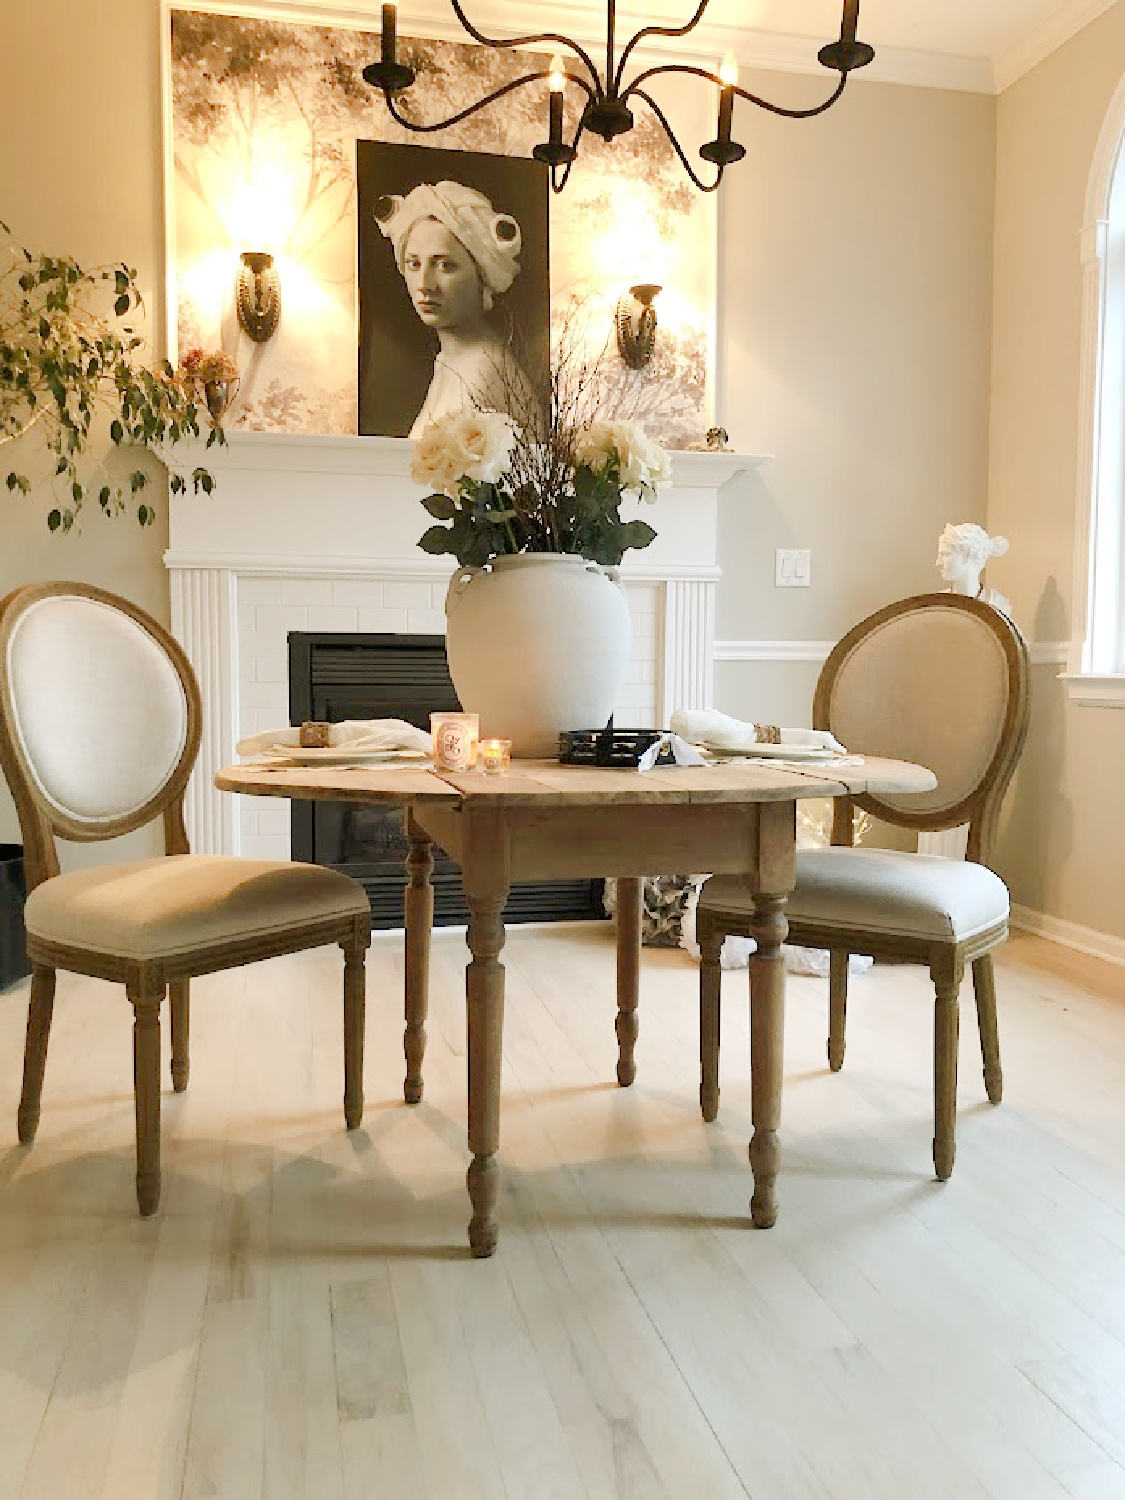 Hello Lovely's serene yet cozy dining room during the holidays. #hellolovelyhome